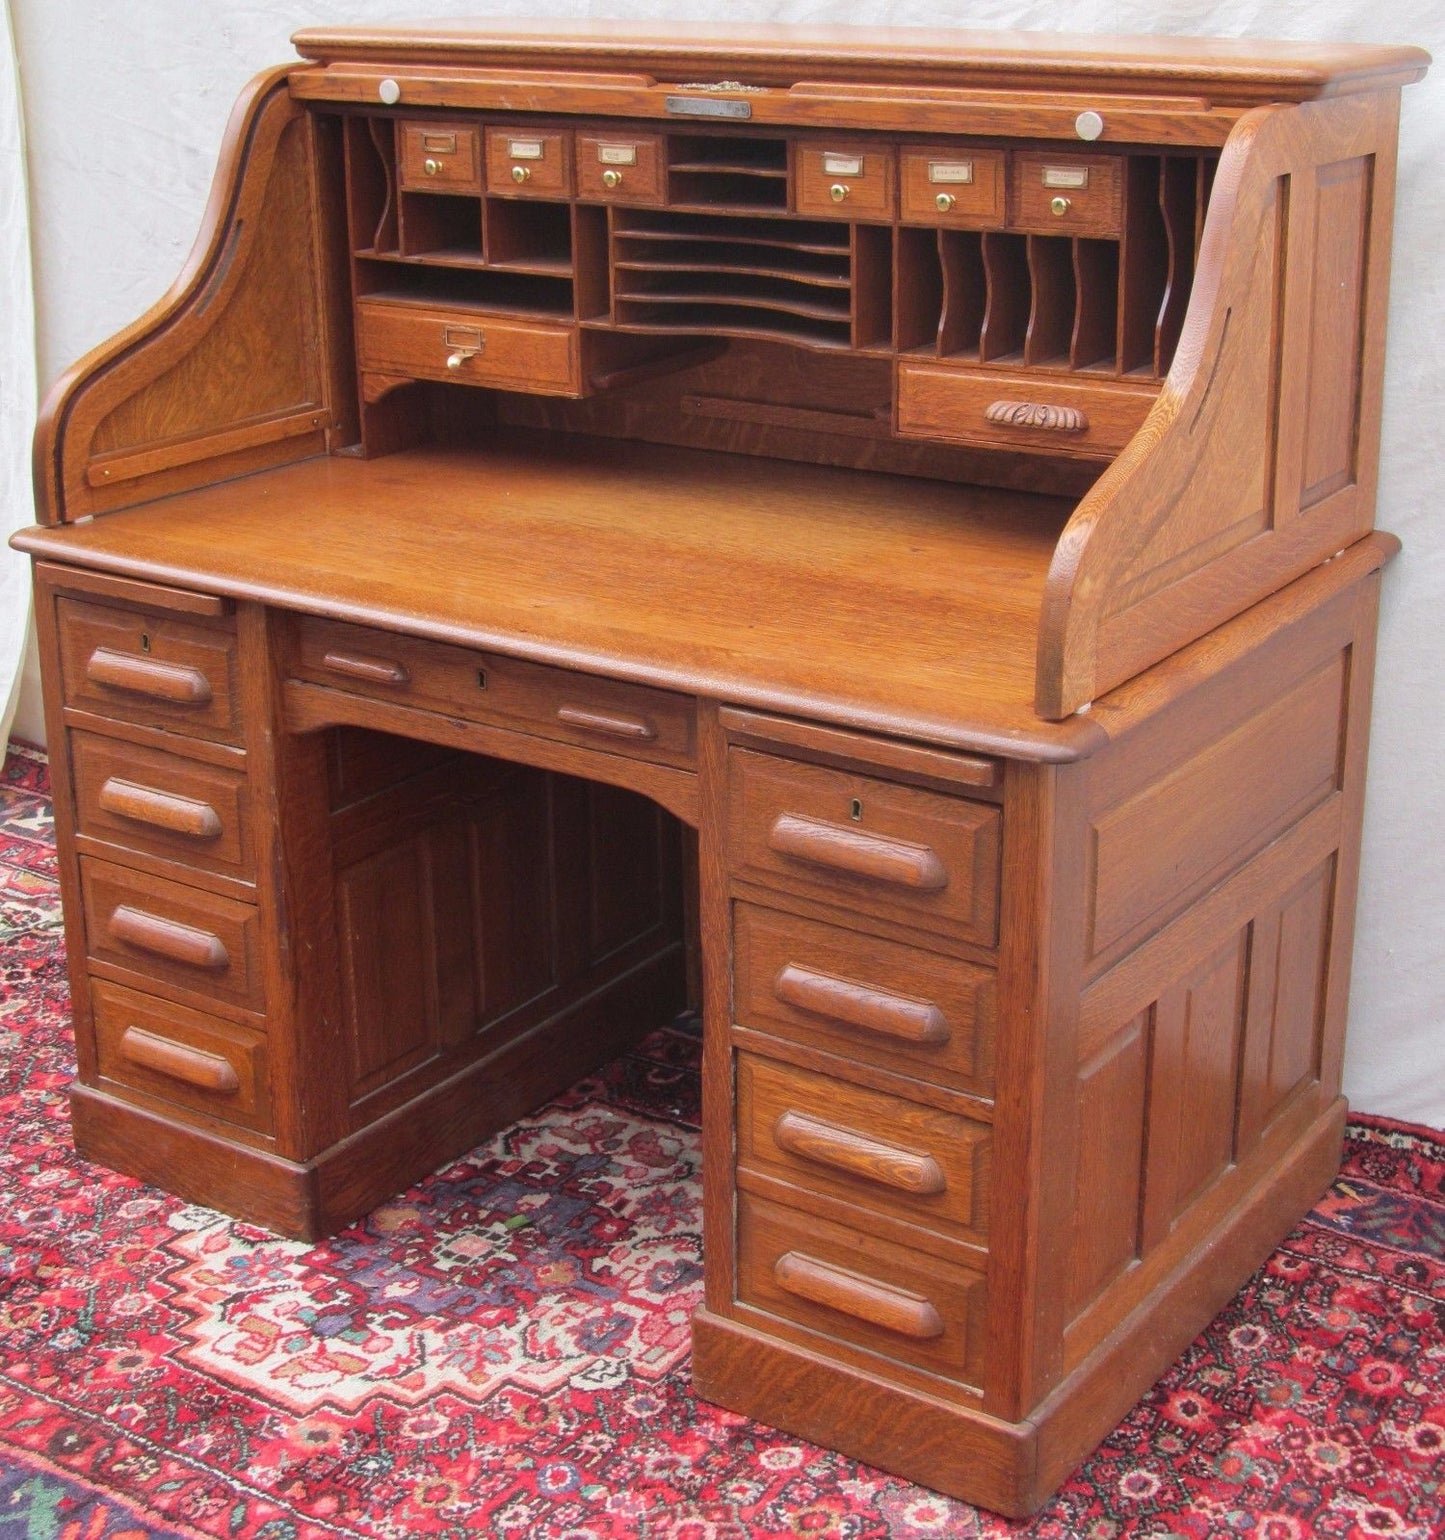 EXCELLENT VICTORIAN SOLID TIGER RAISED PANELED OAK S ROLL TOP DESK-TOP QUALITY!